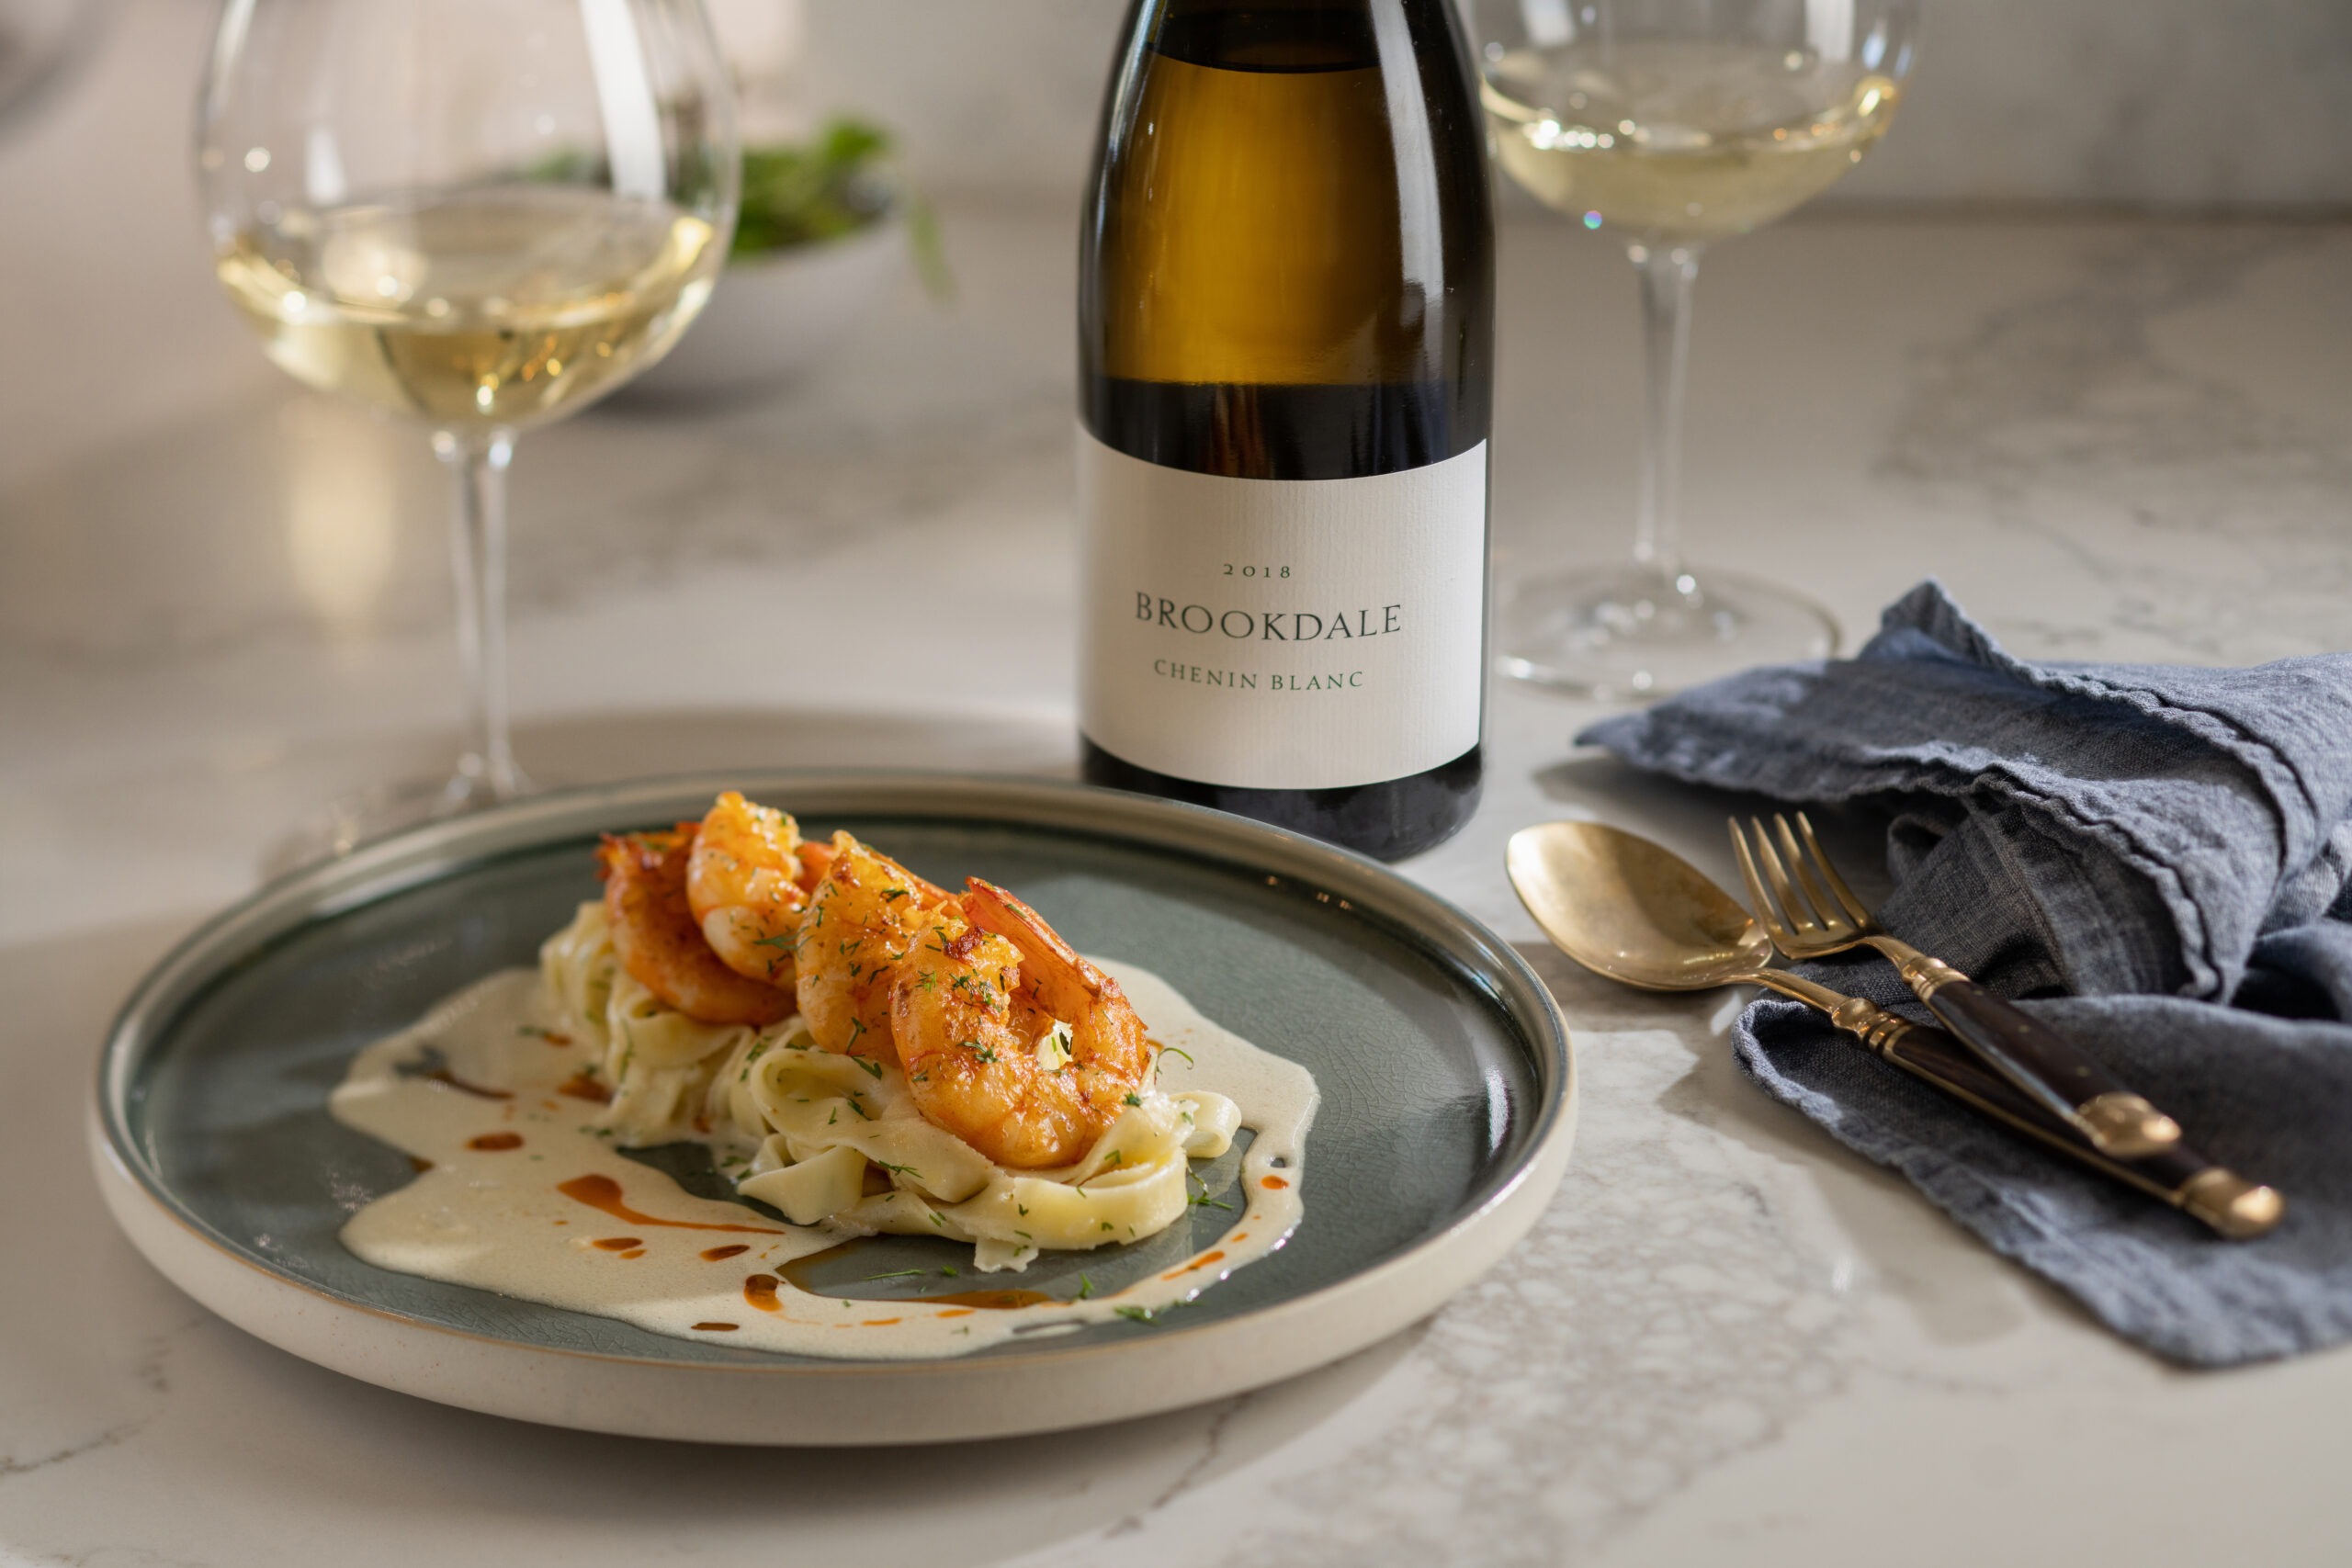 Brookdale Chenin Blanc wine served with fine dining food dish